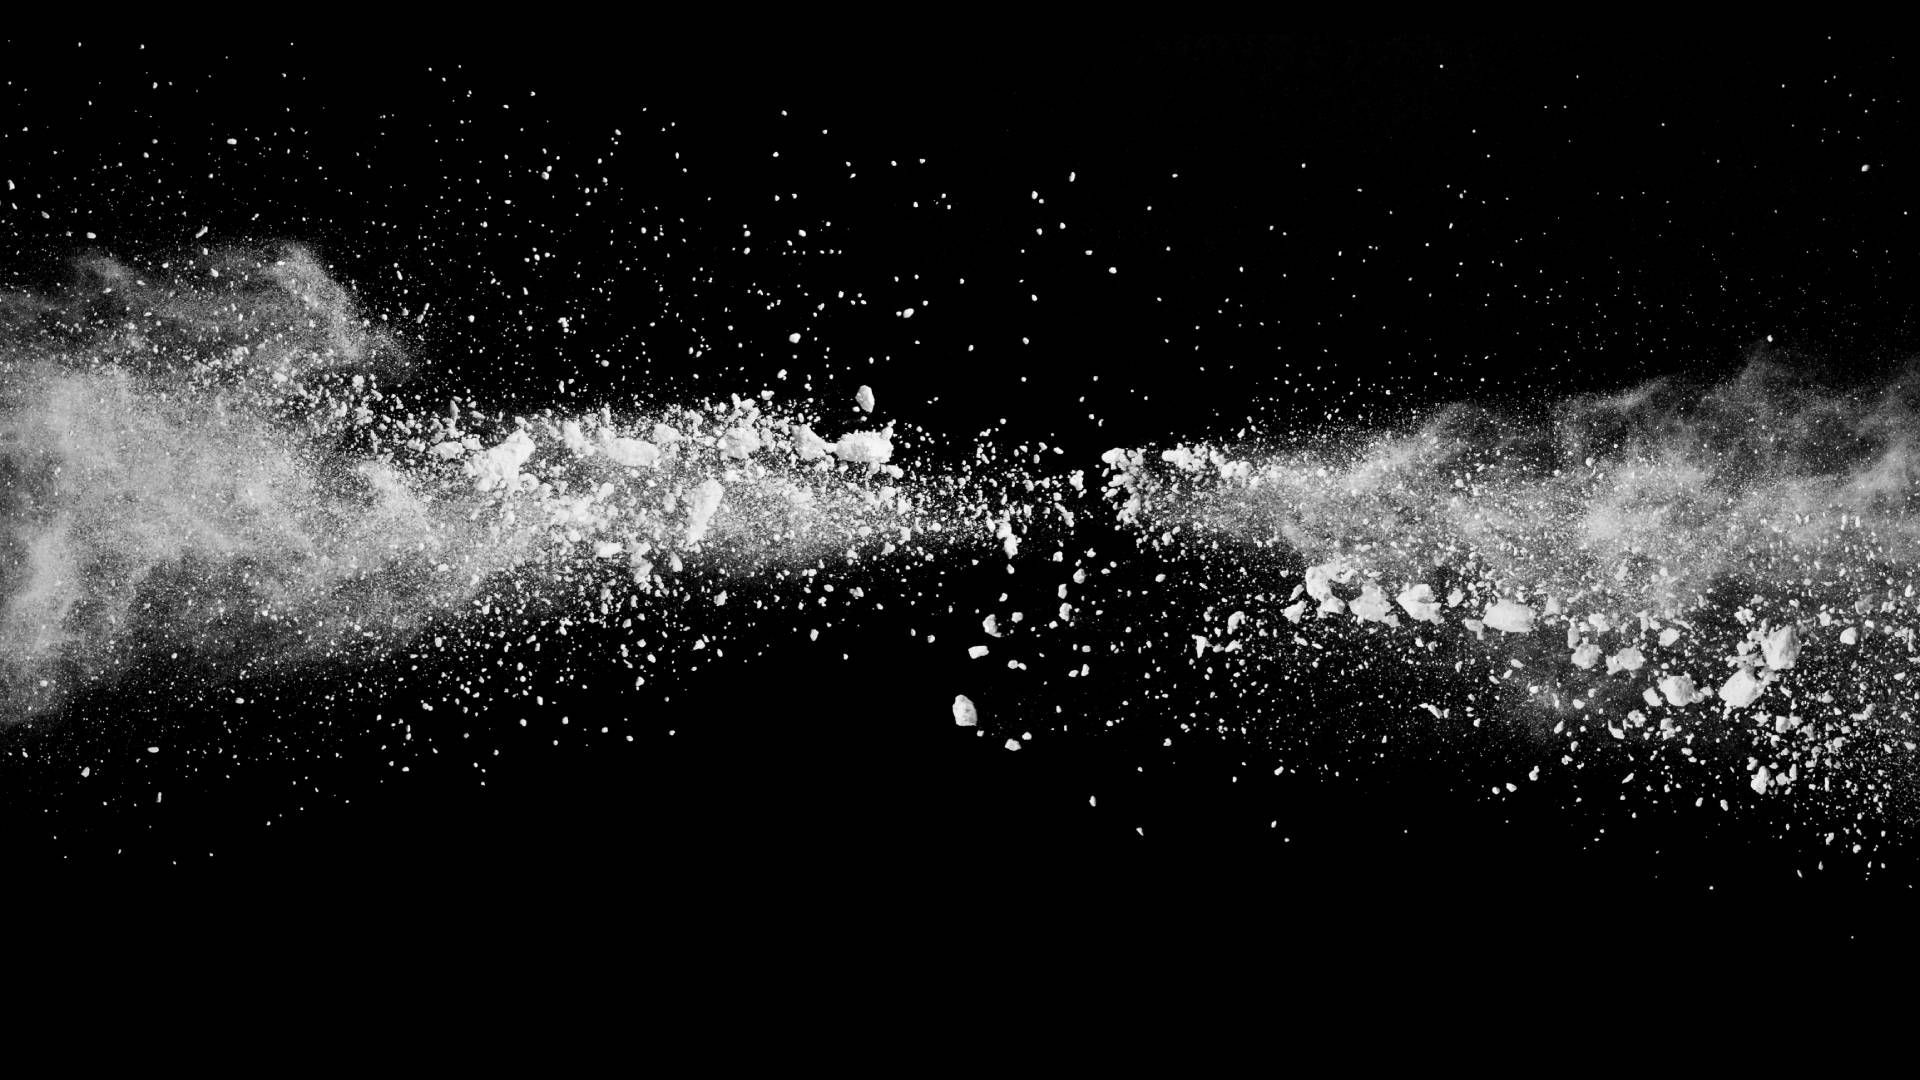 An image of powder flying against a black background near Tollesboro, Kentucky (KY)